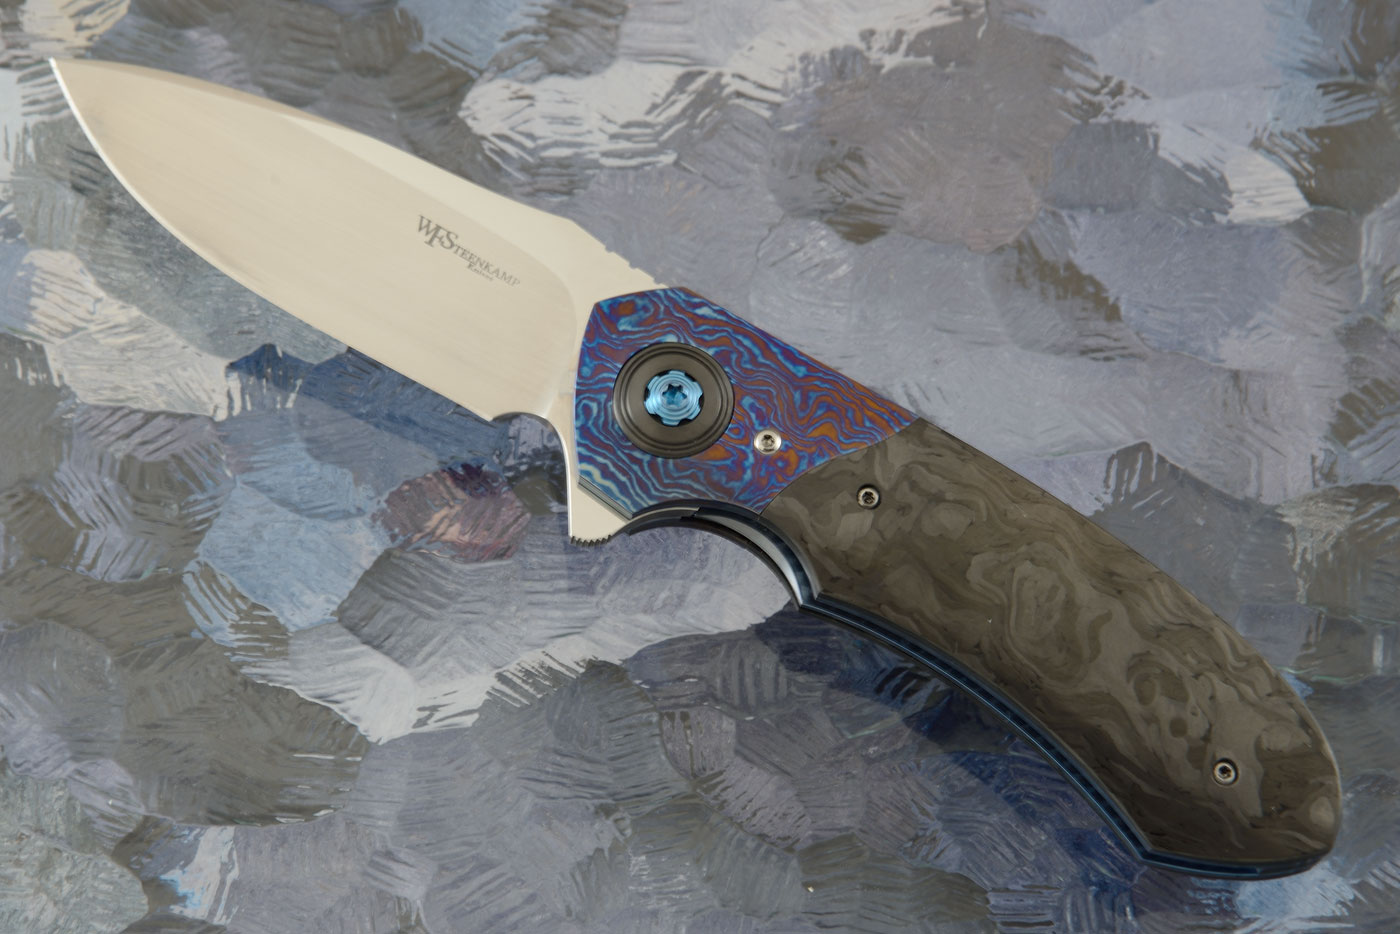 Hornet with Marbled Carbon Fiber and Timascus (IKBS)